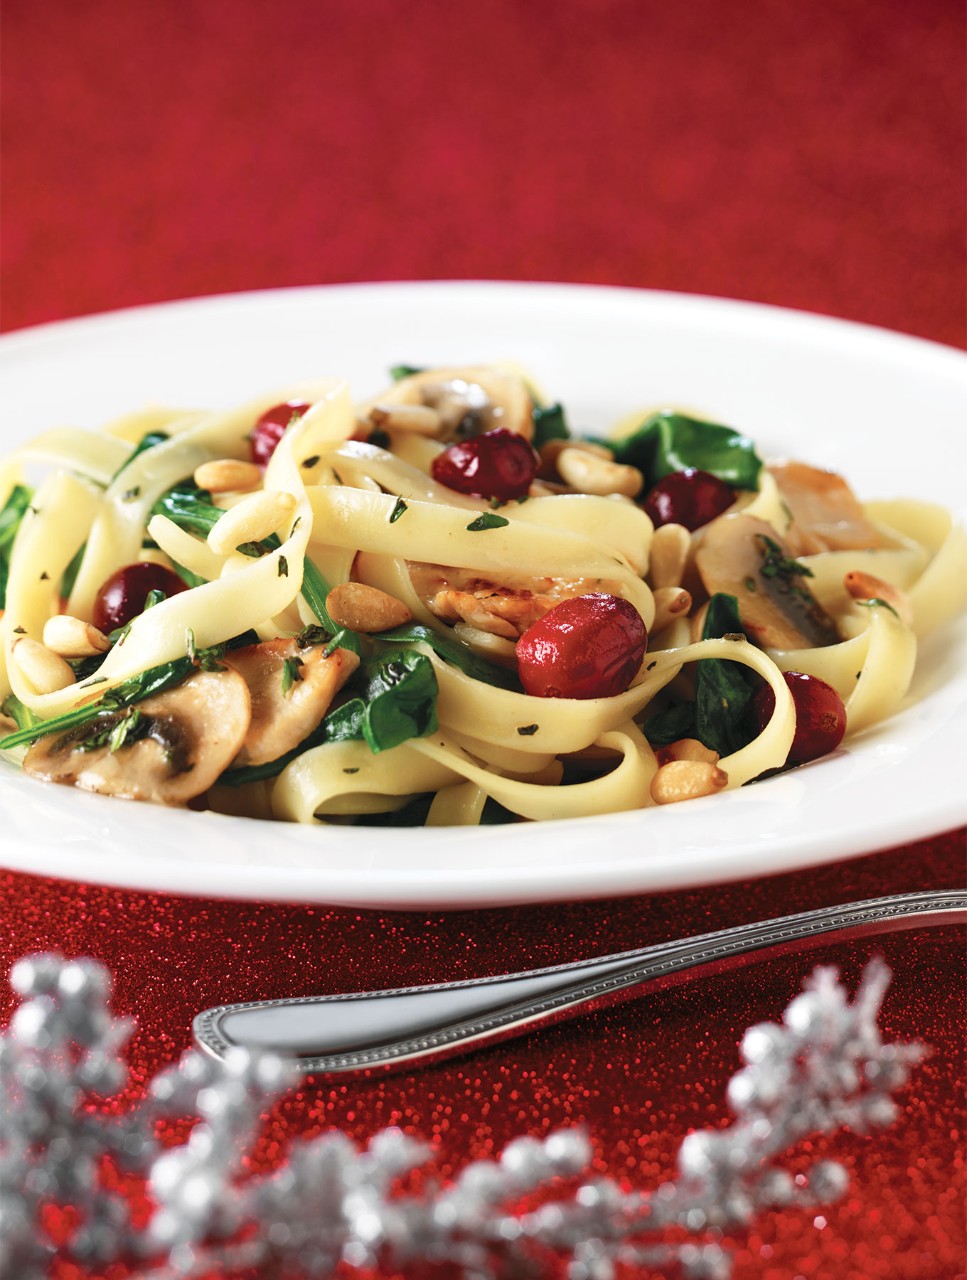 Fettuccine Florentine with Chicken and Glazed Cranberries